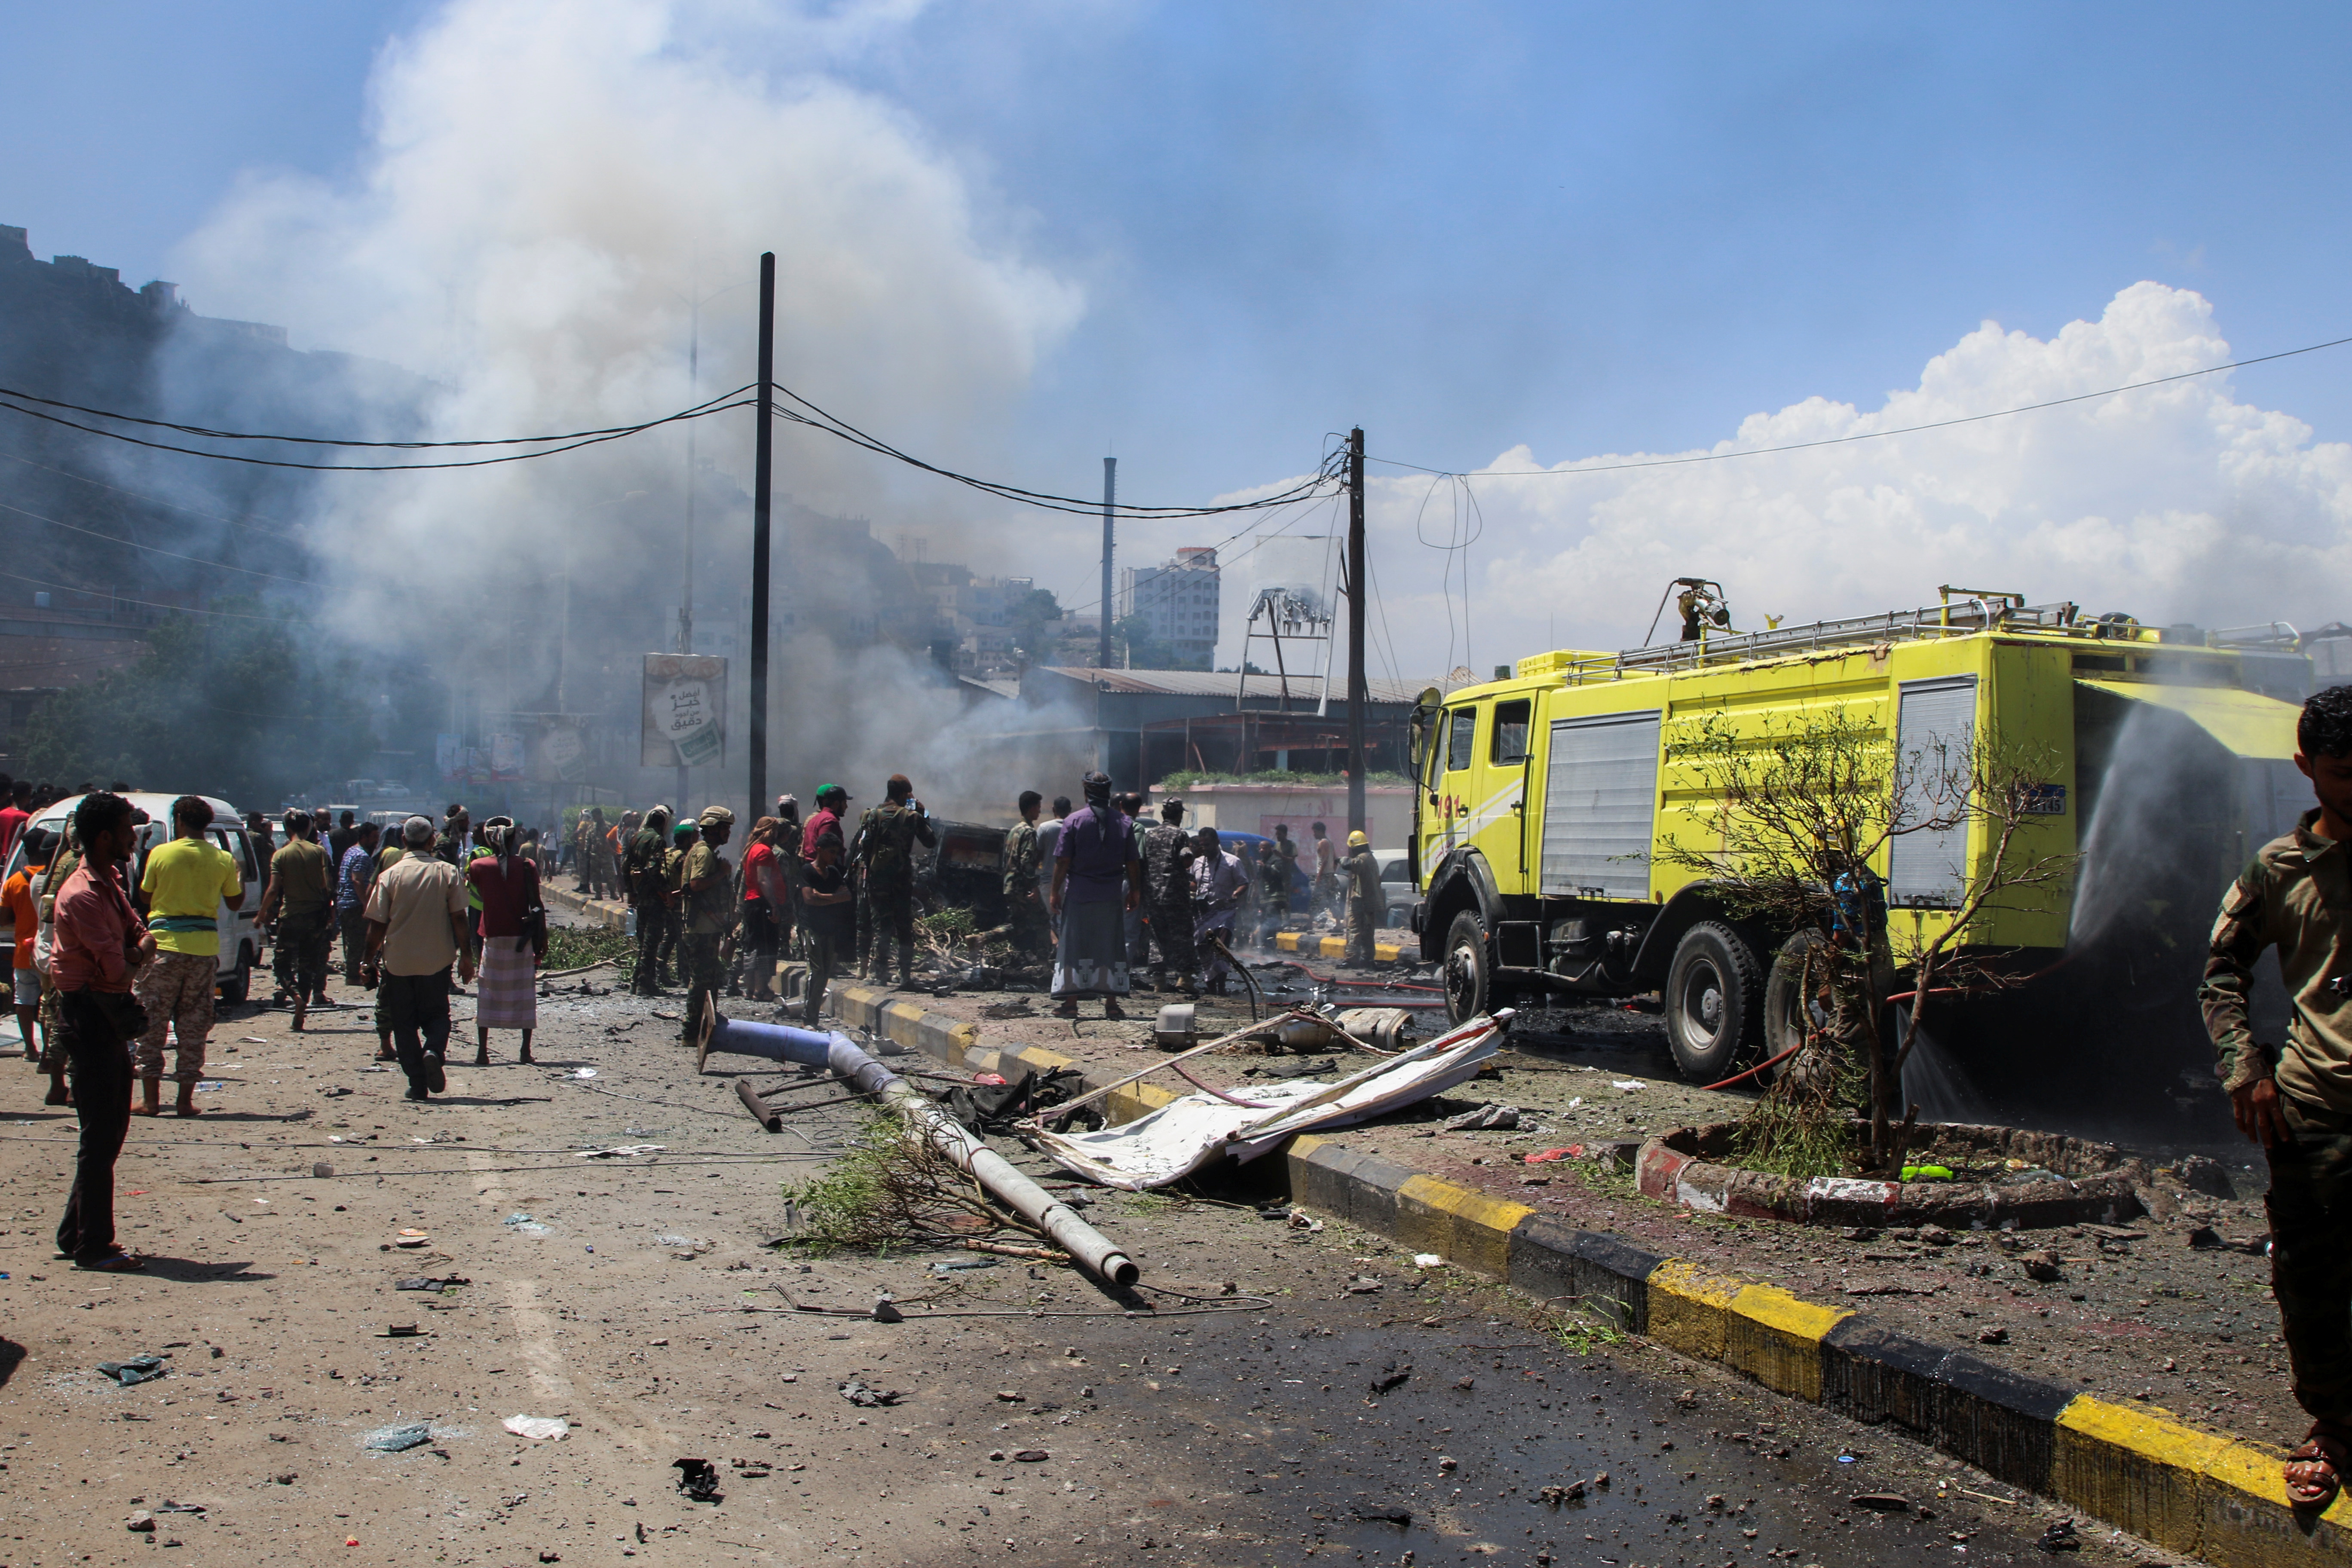 Policemen and firefighters work at the scene of a blast in Aden